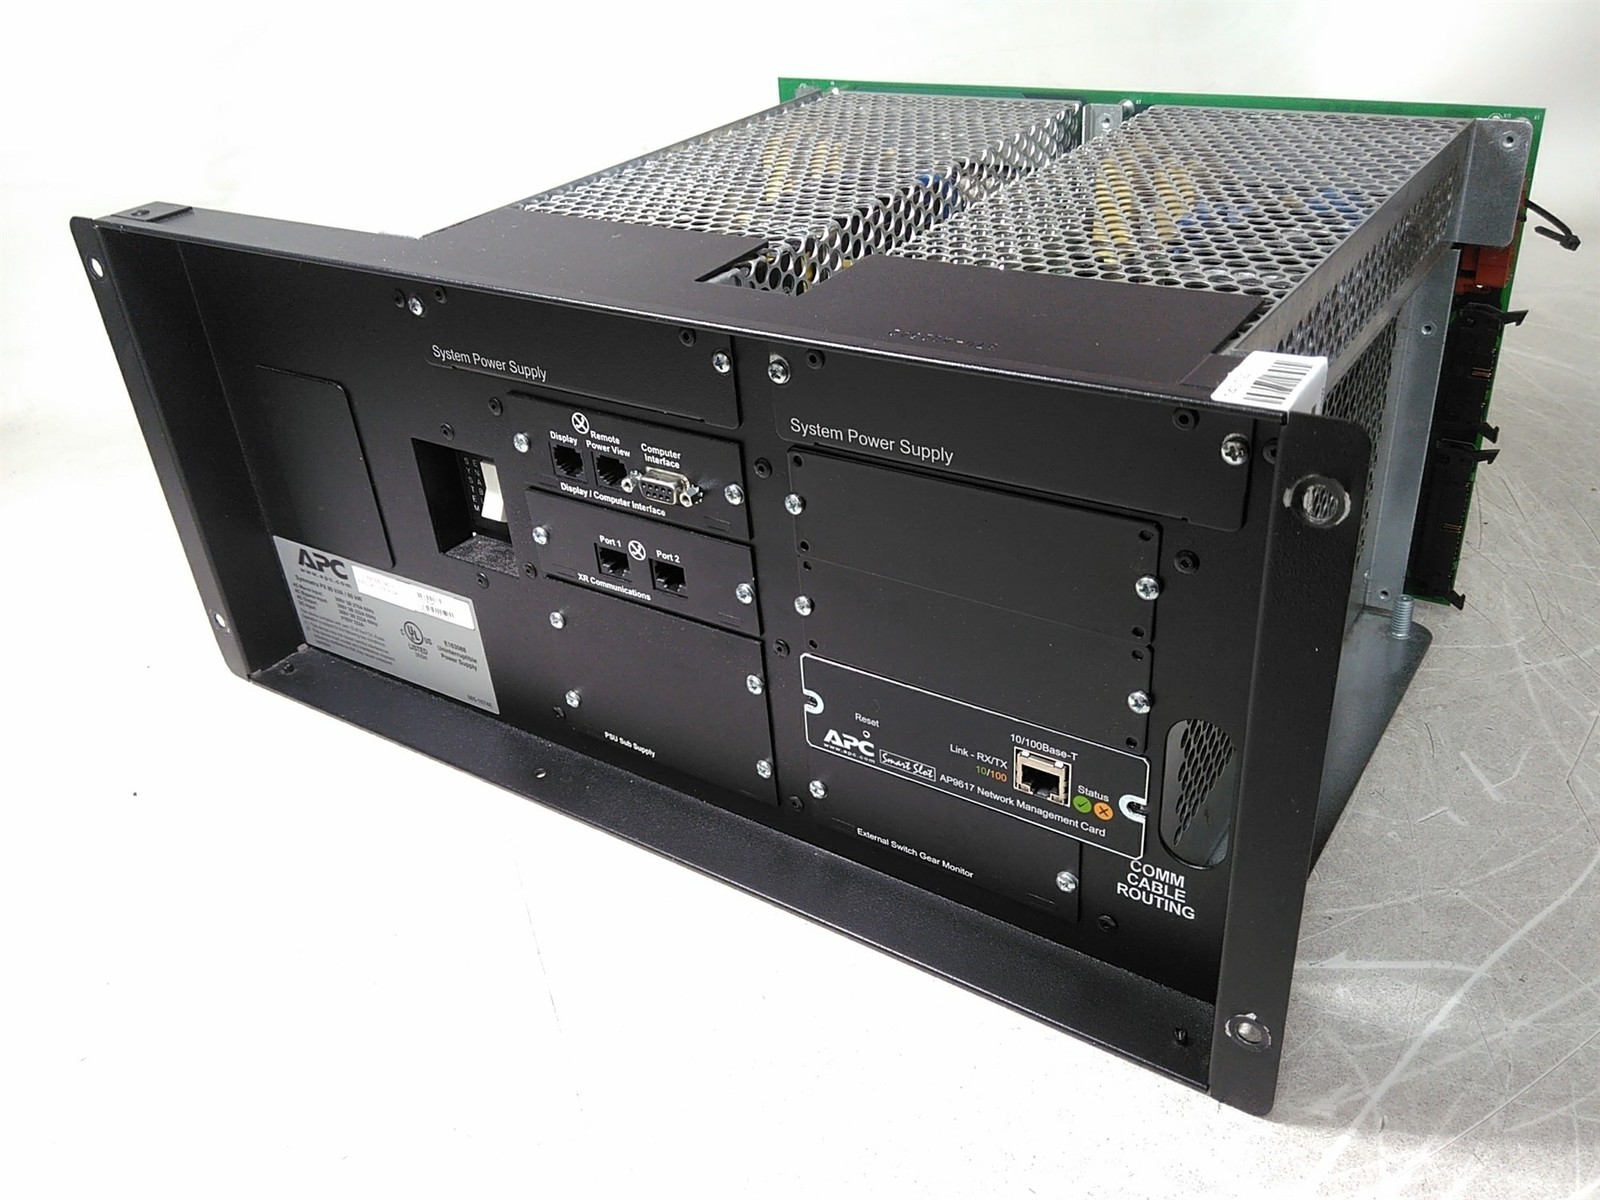 Primary image for Defective APC SYCF80KF Symmetra PX 80 kVA 80kW Power Supply AS-IS for Repair